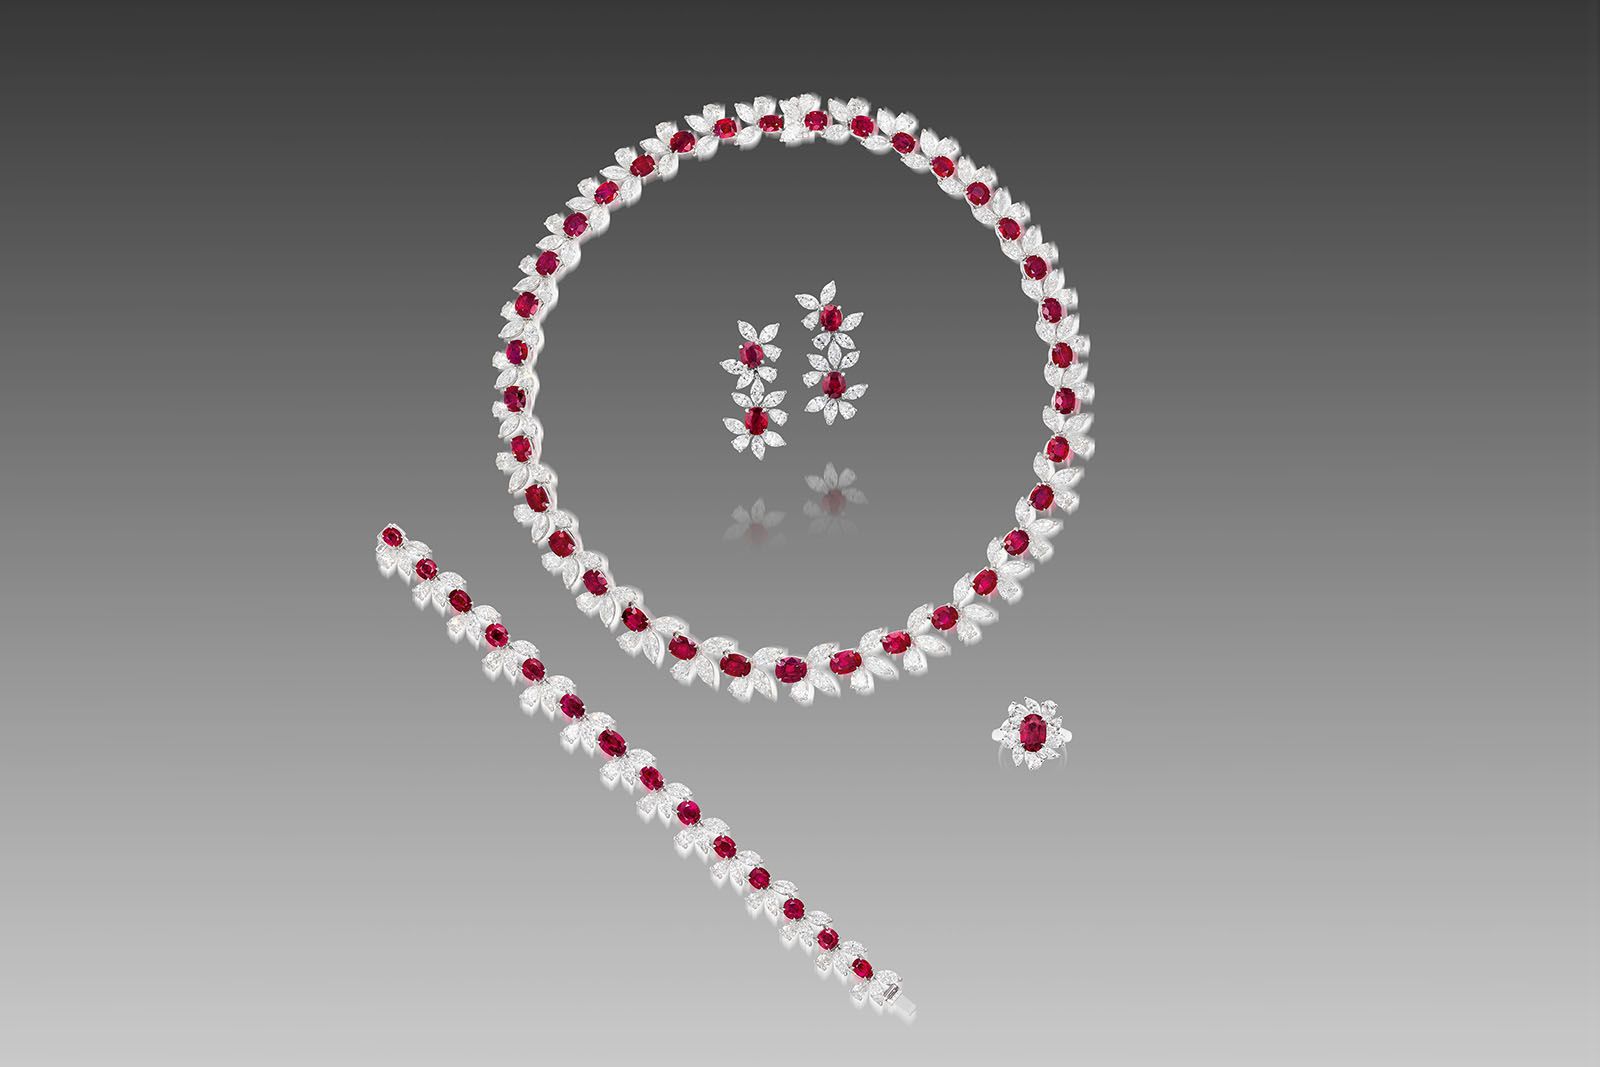 A Burmese ruby and diamond necklace, bracelet, ring and earring set owned by a prominent Middle Eastern collector, which will be sold by Phillips Hong Kong in November 2021